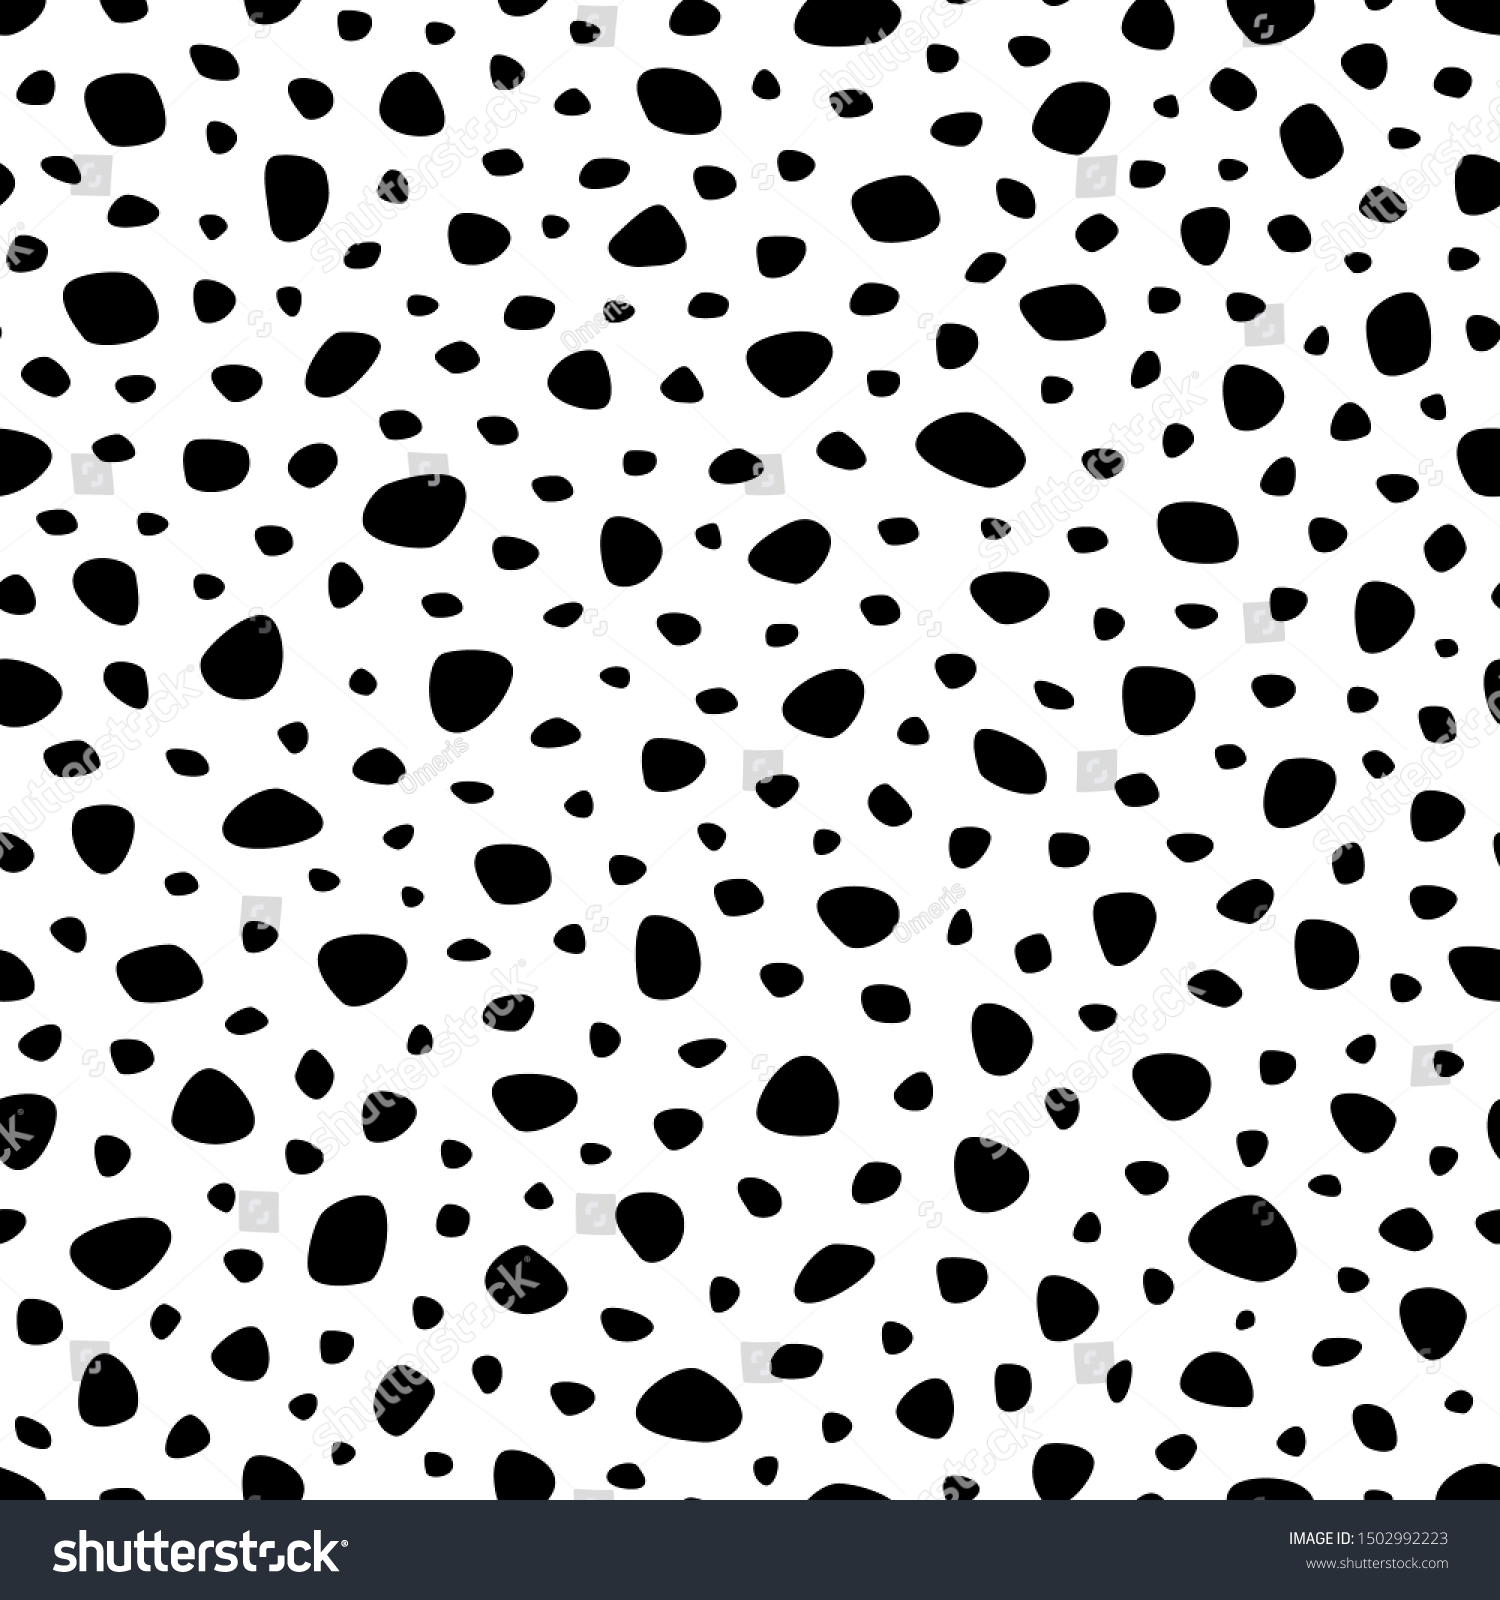 SVG of Background polka dot. Seamless pattern. Random dots, circles, animal skin. Design for fabric, wallpaper. Irregular random abstract texture with dots. Modern stylish texture. Repeating graphic backdrop svg